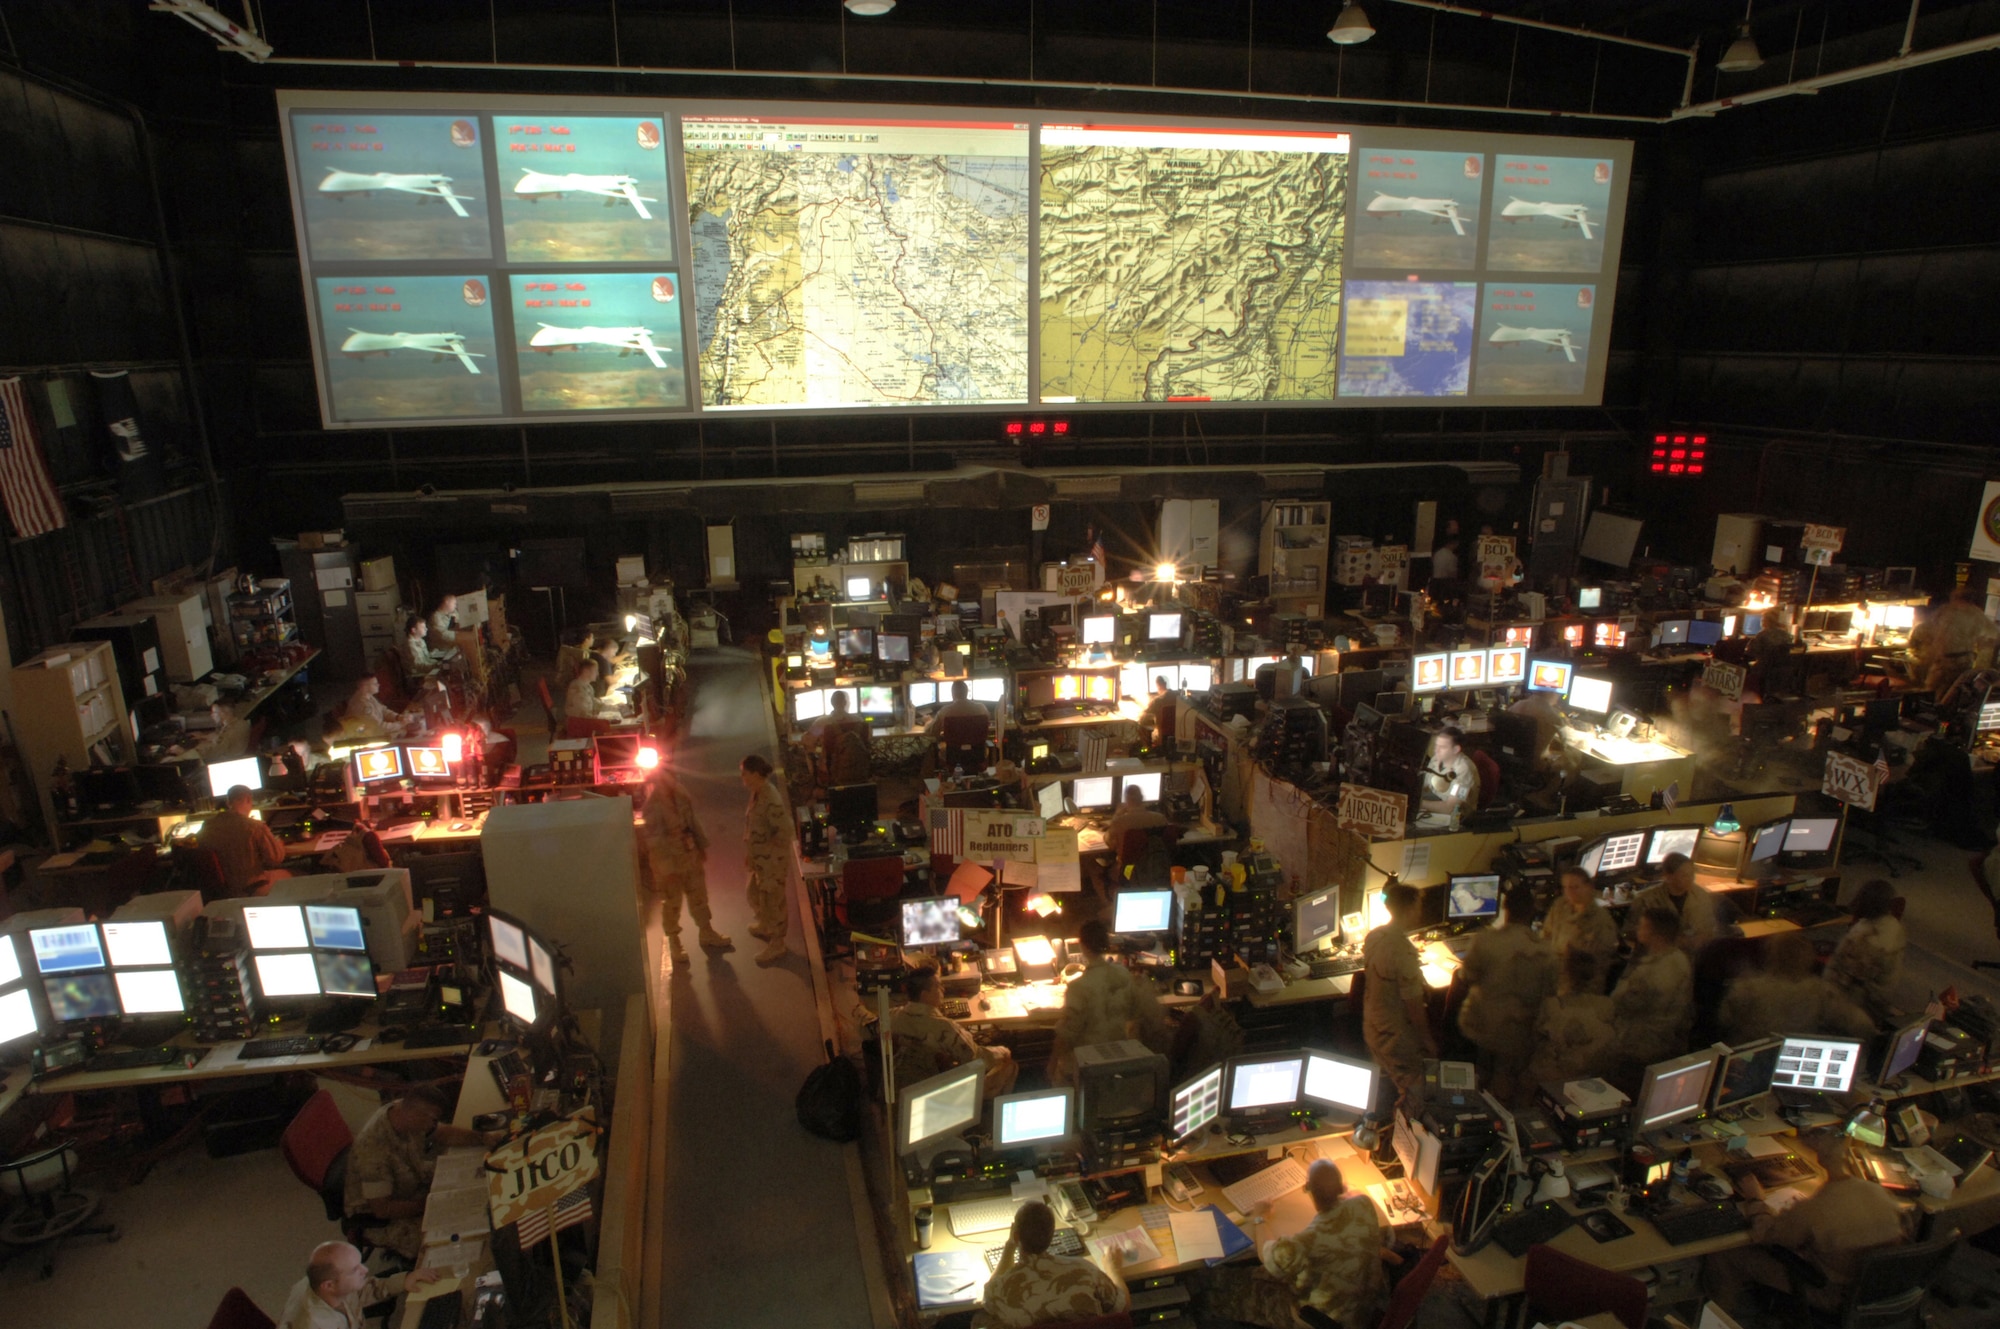 The Combined Air and Space Operations Center commands and controls the broad spectrum of what air power brings to the fight: Global Vigilance, Global Reach, and Global Power. Located in the Air Forces Central theater of operations, the CAOC provides the command and control of airpower throughout Iraq, Afghanistan and 25 other nations, extending from Central Asia to the Horn of Africa. 